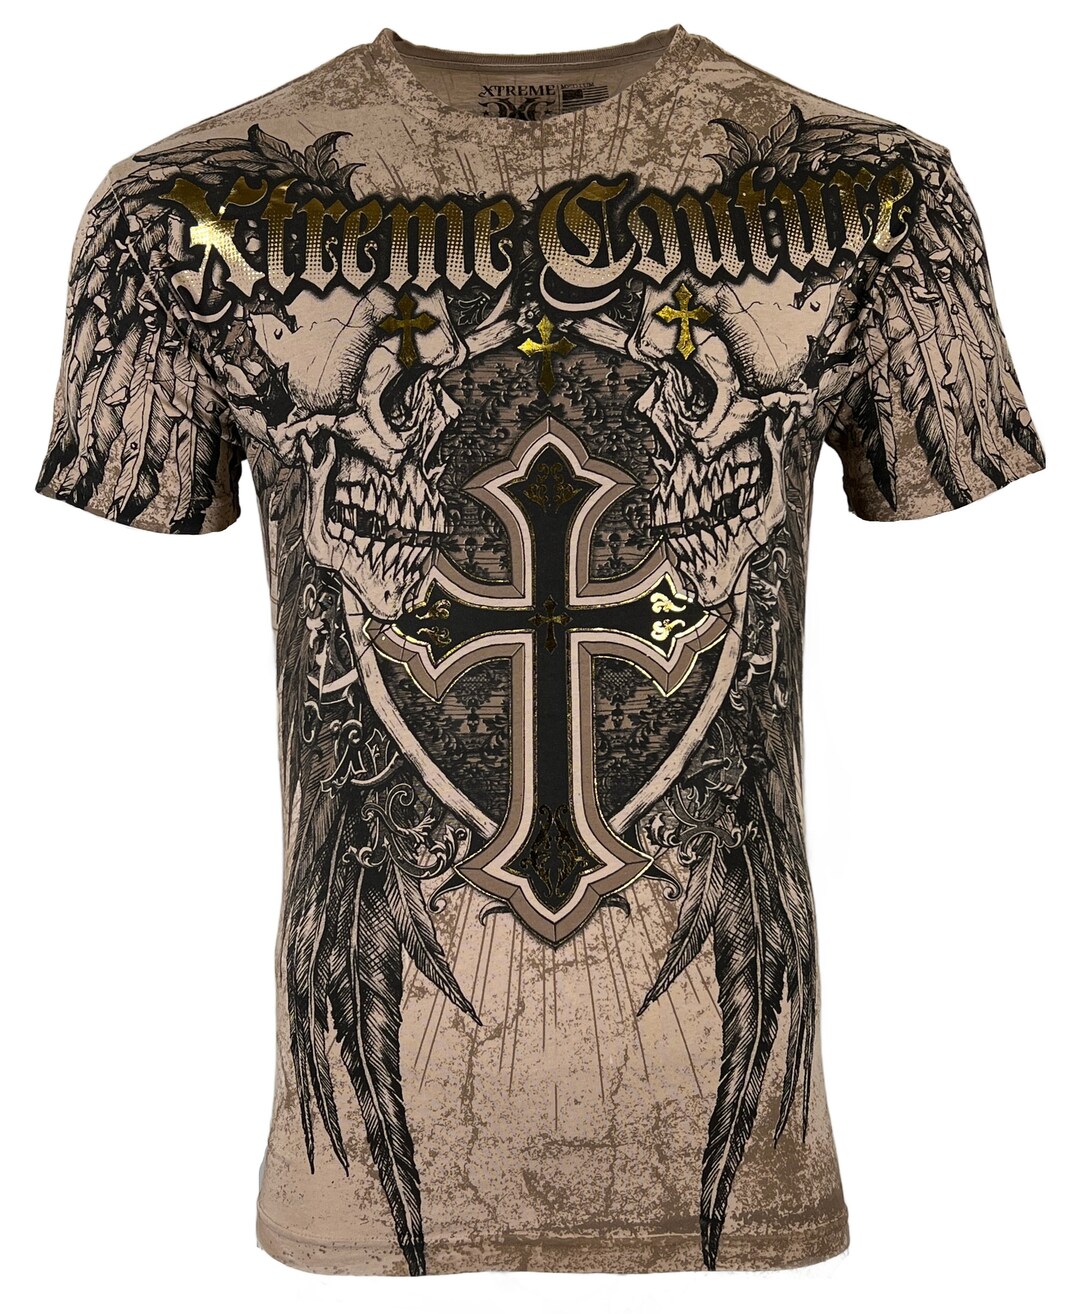 Xtreme Couture by Affliction Men's T-shirt INHUMAN SKULLS - Etsy